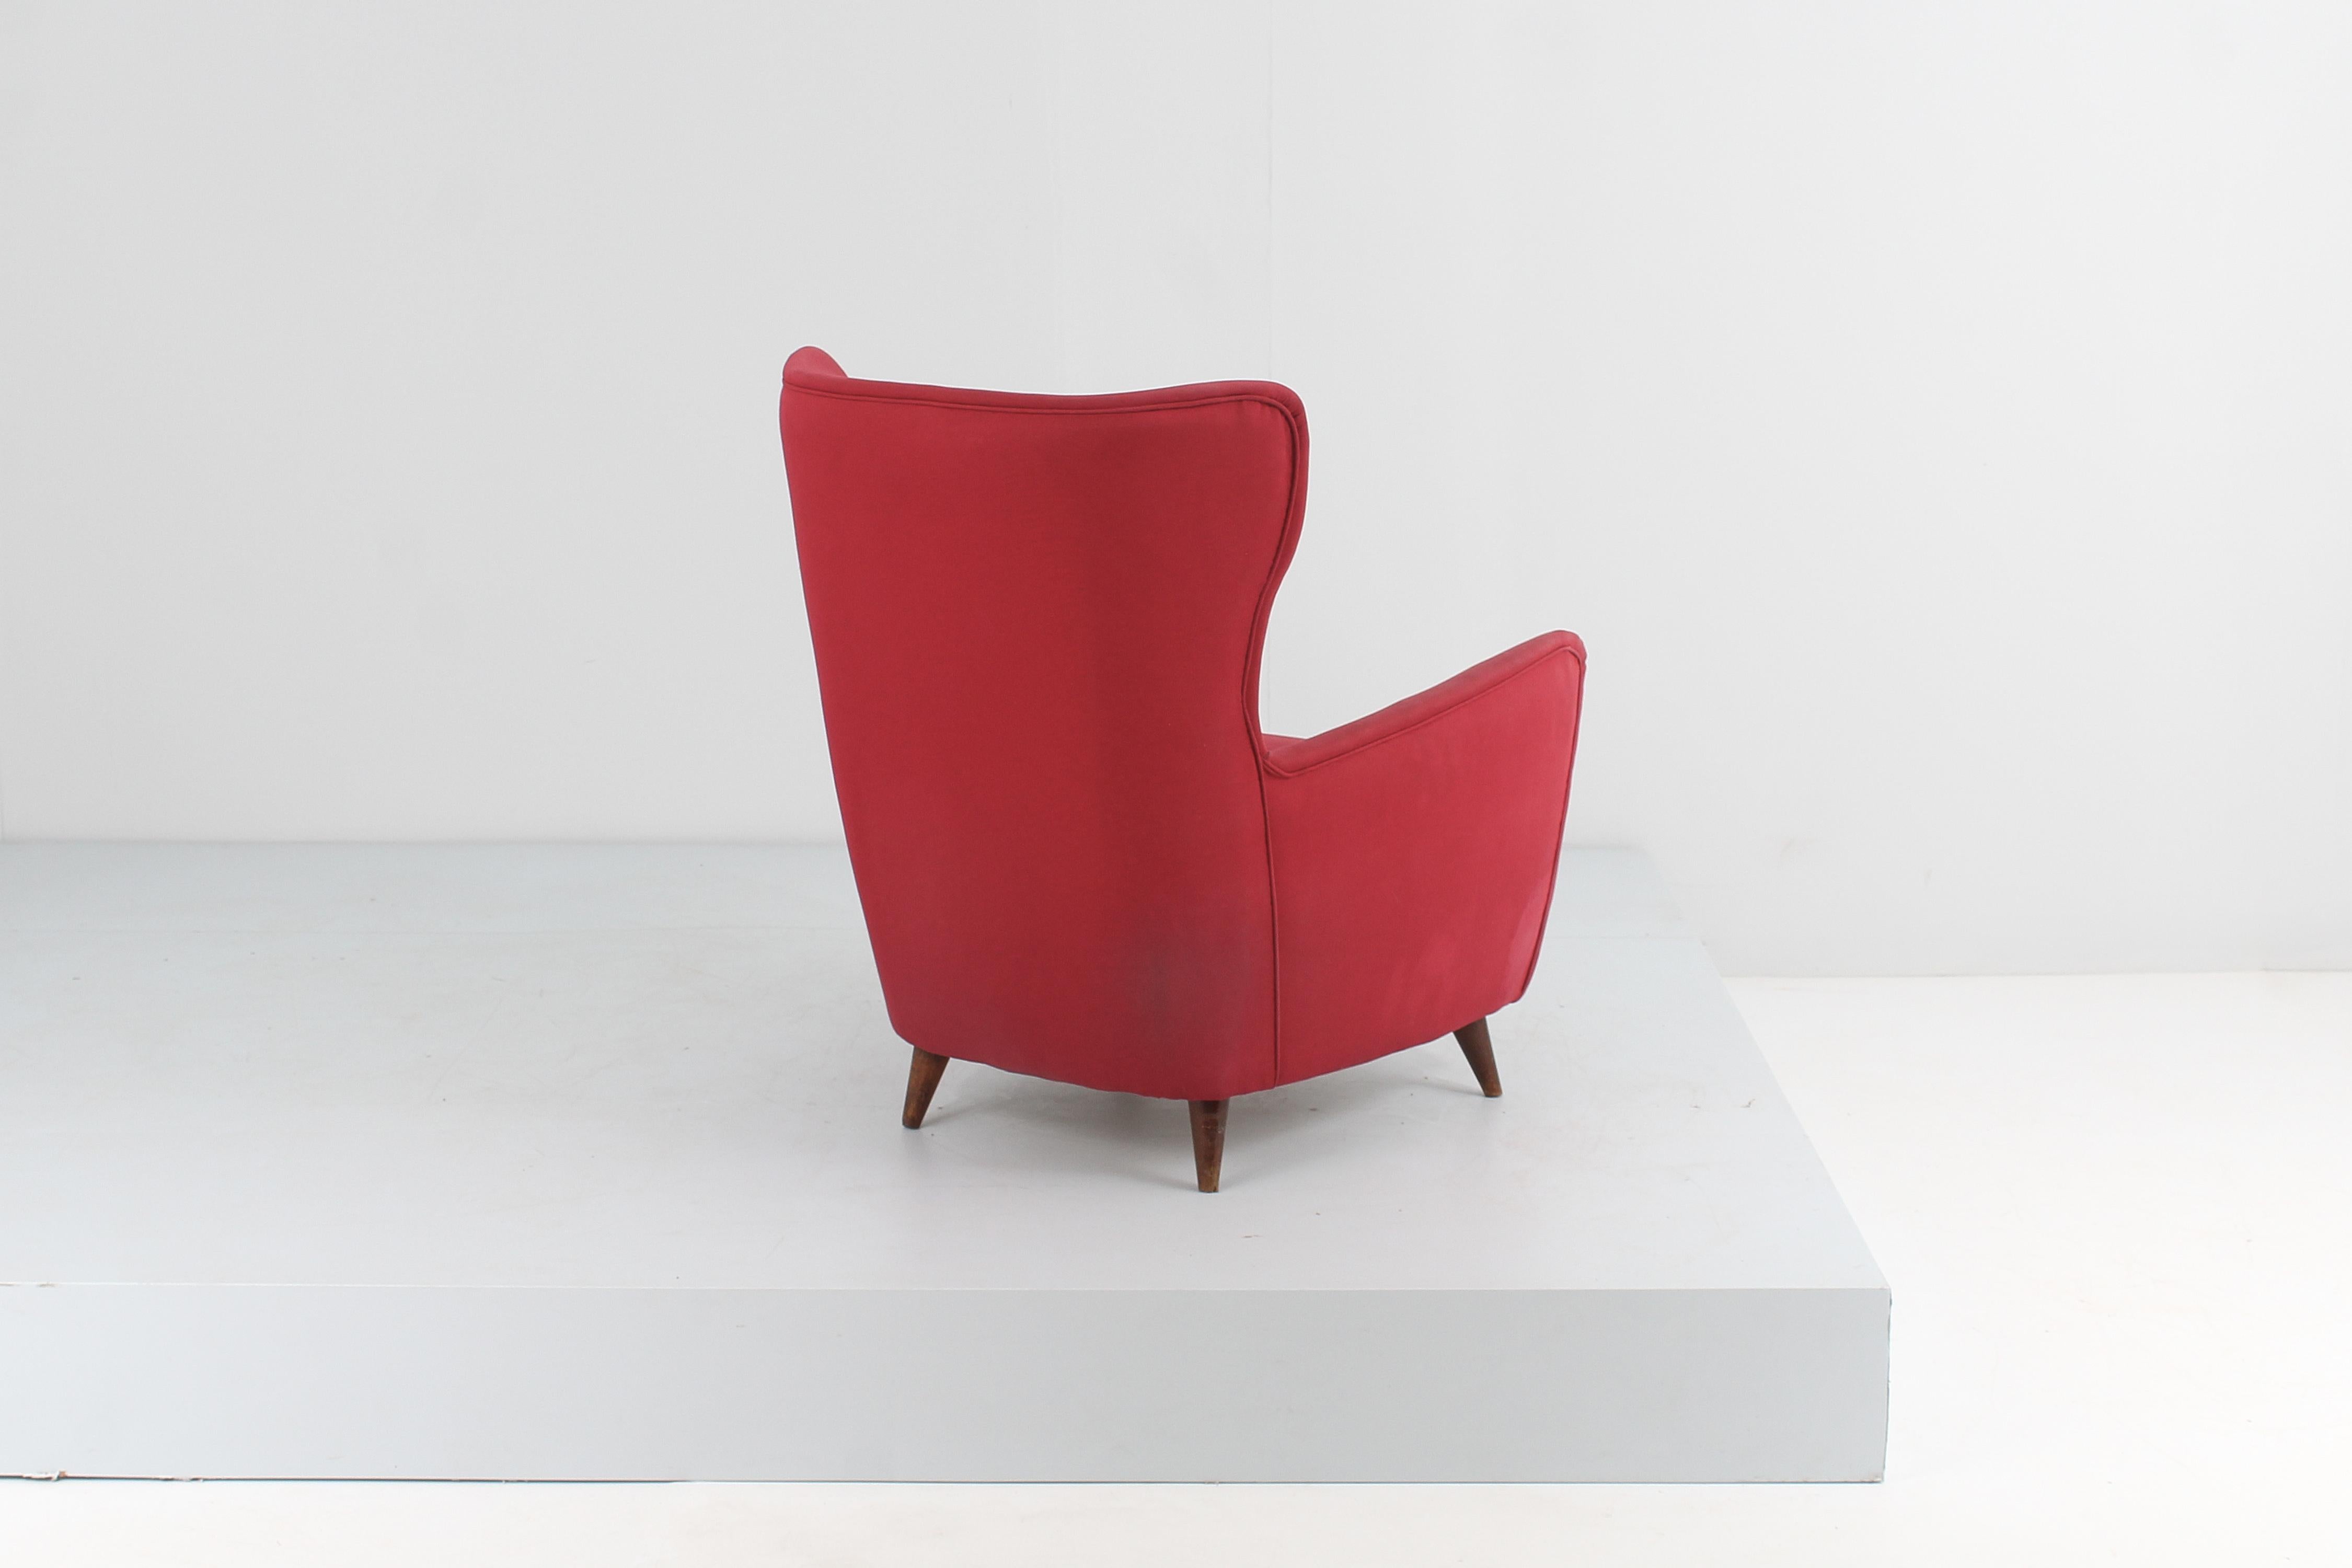 Italian Midcentury Giò Ponti Style Wood and Red Fabric Armchair, circa 1950s Italy  For Sale